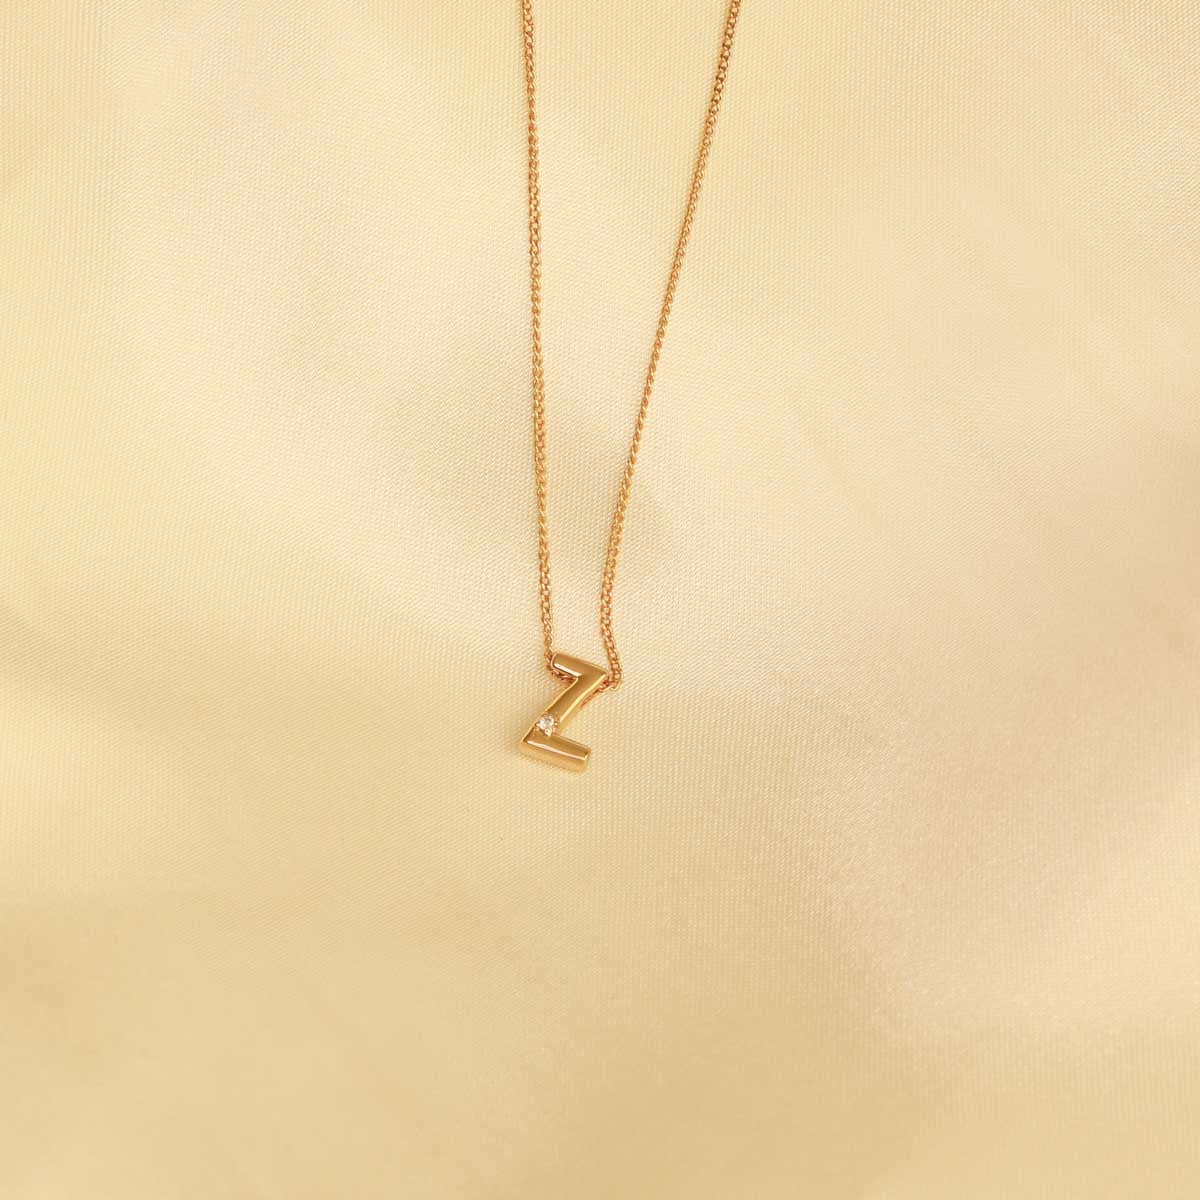 Flat lay shot of Z Initial Pendant Necklace in Gold